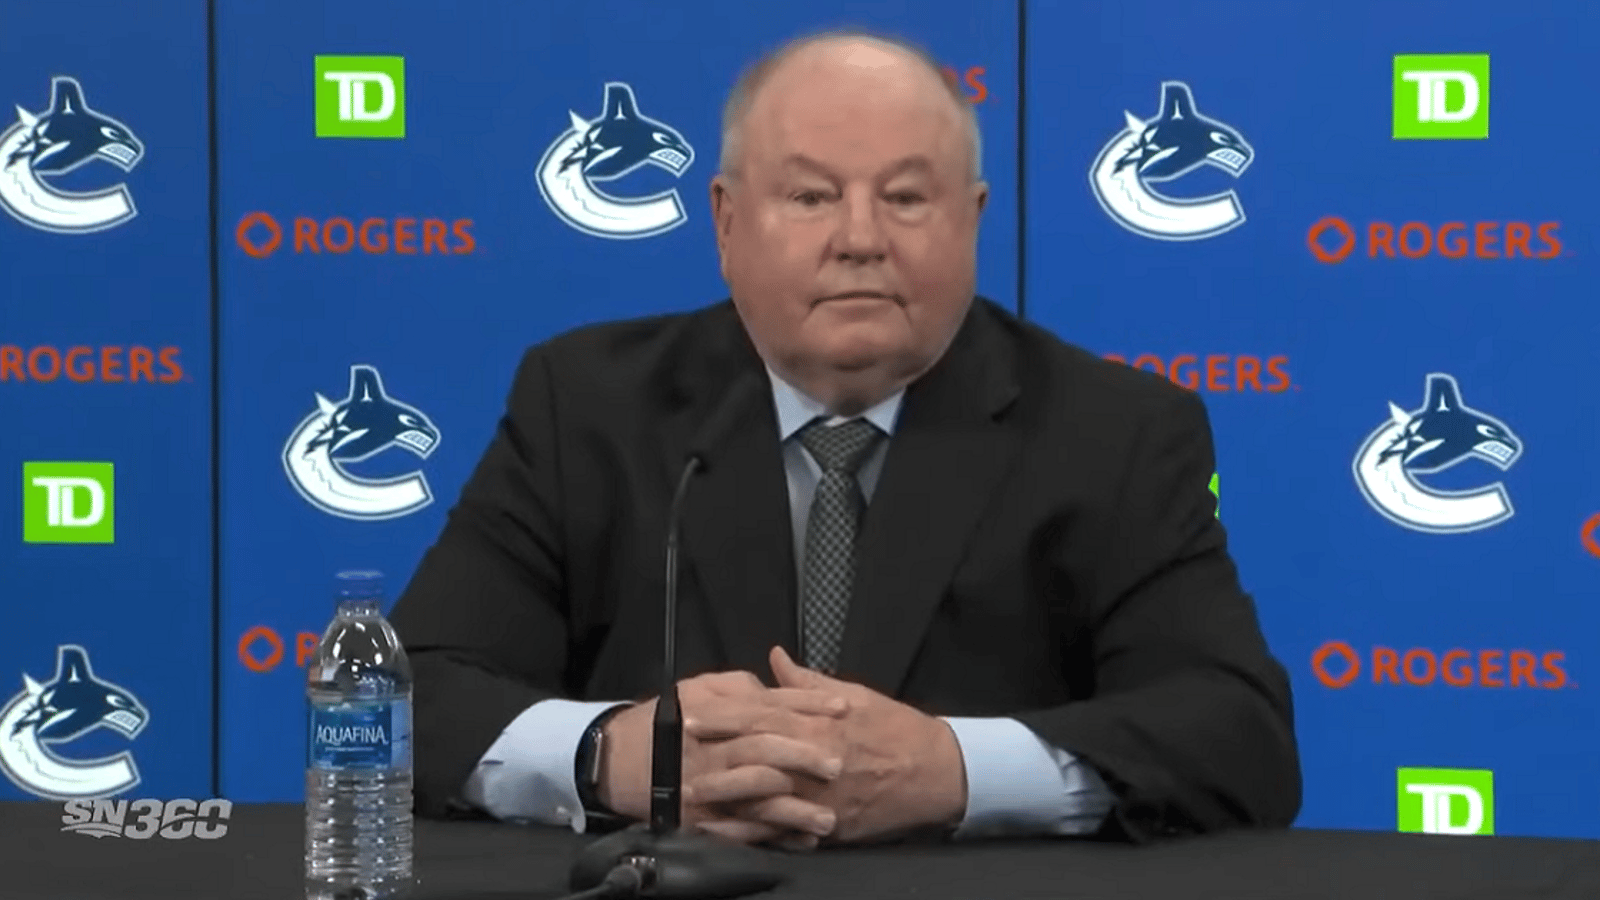 Former NHL players respond to Canucks' treatment of Bruce Boudreau.